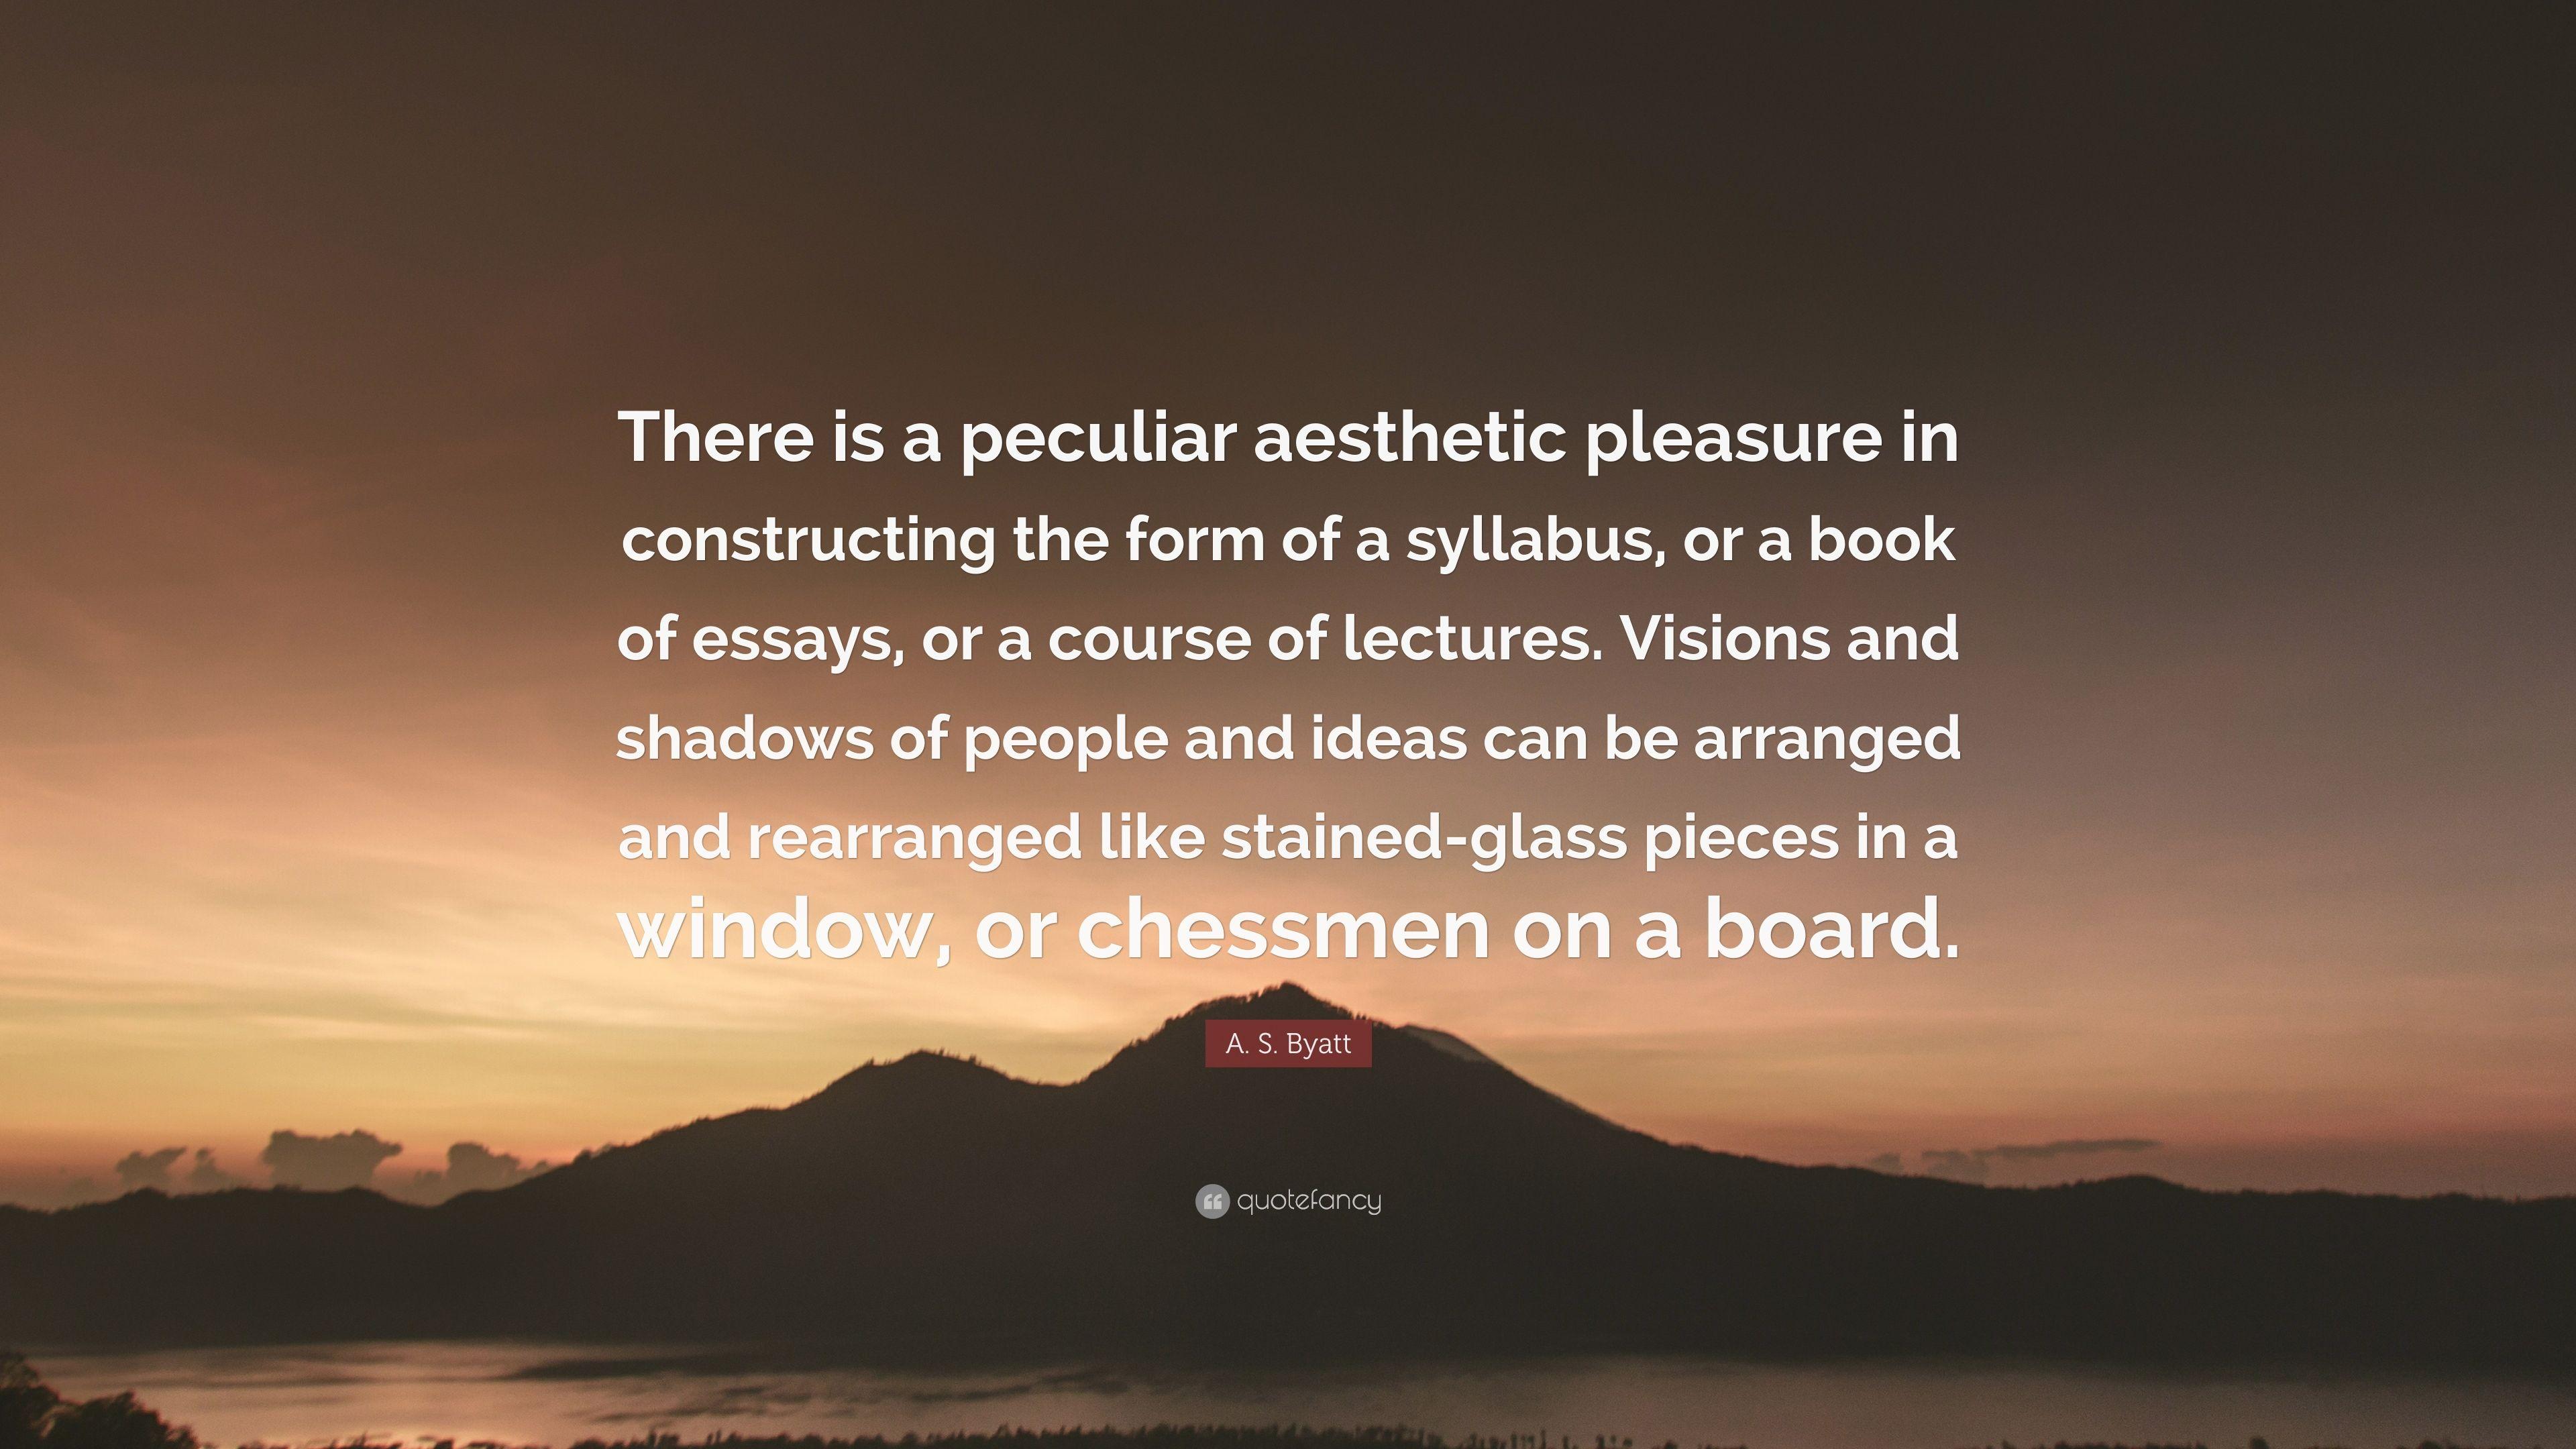 A. S. Byatt Quote: “There is a peculiar aesthetic pleasure